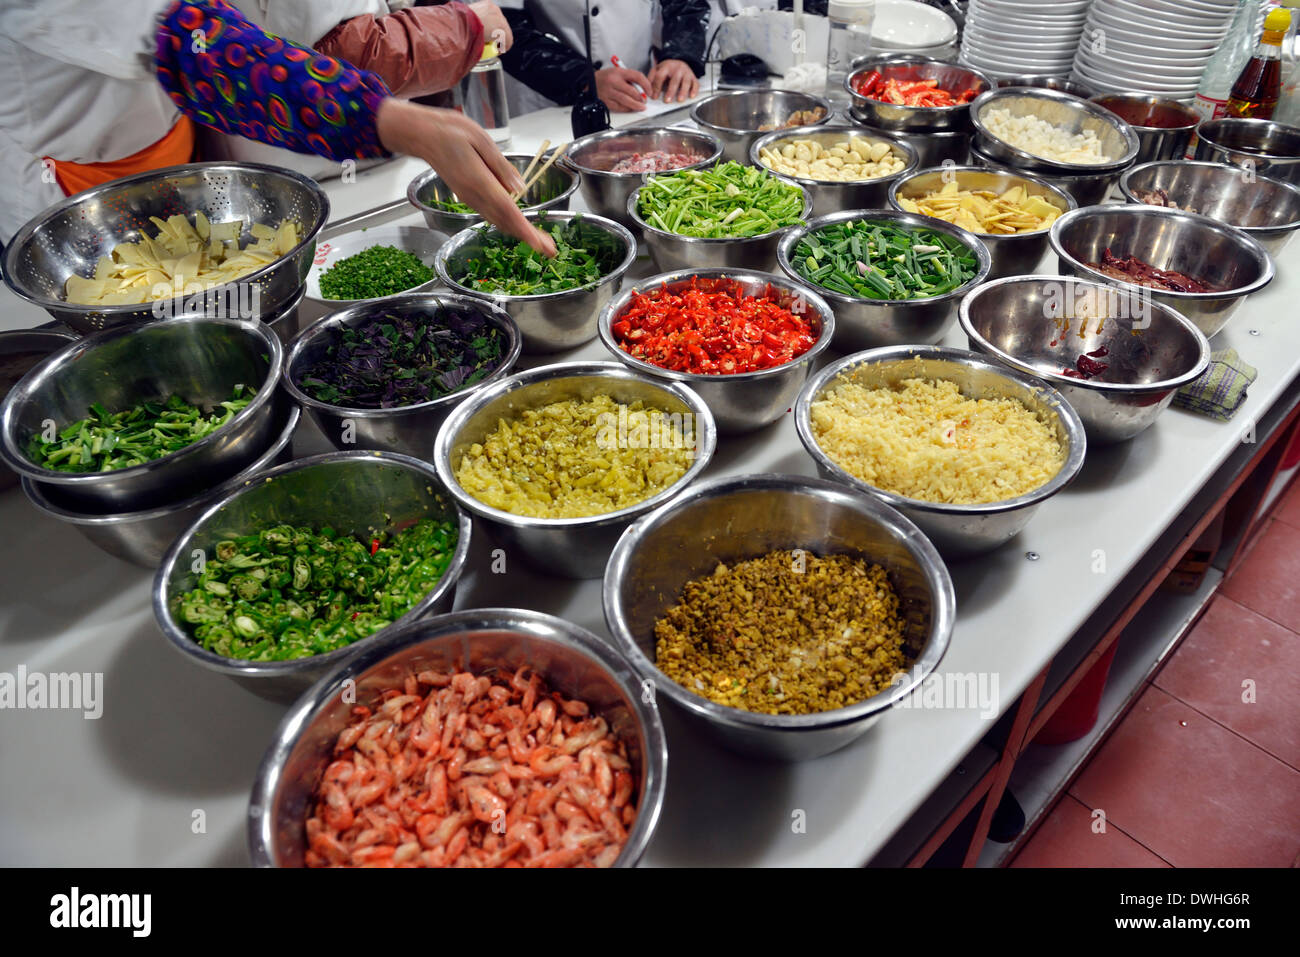 Ingredients to cook Xiang Cuisine or Hunan Cuisine in a restaurant in Changsha, Hunan province, China. Stock Photo